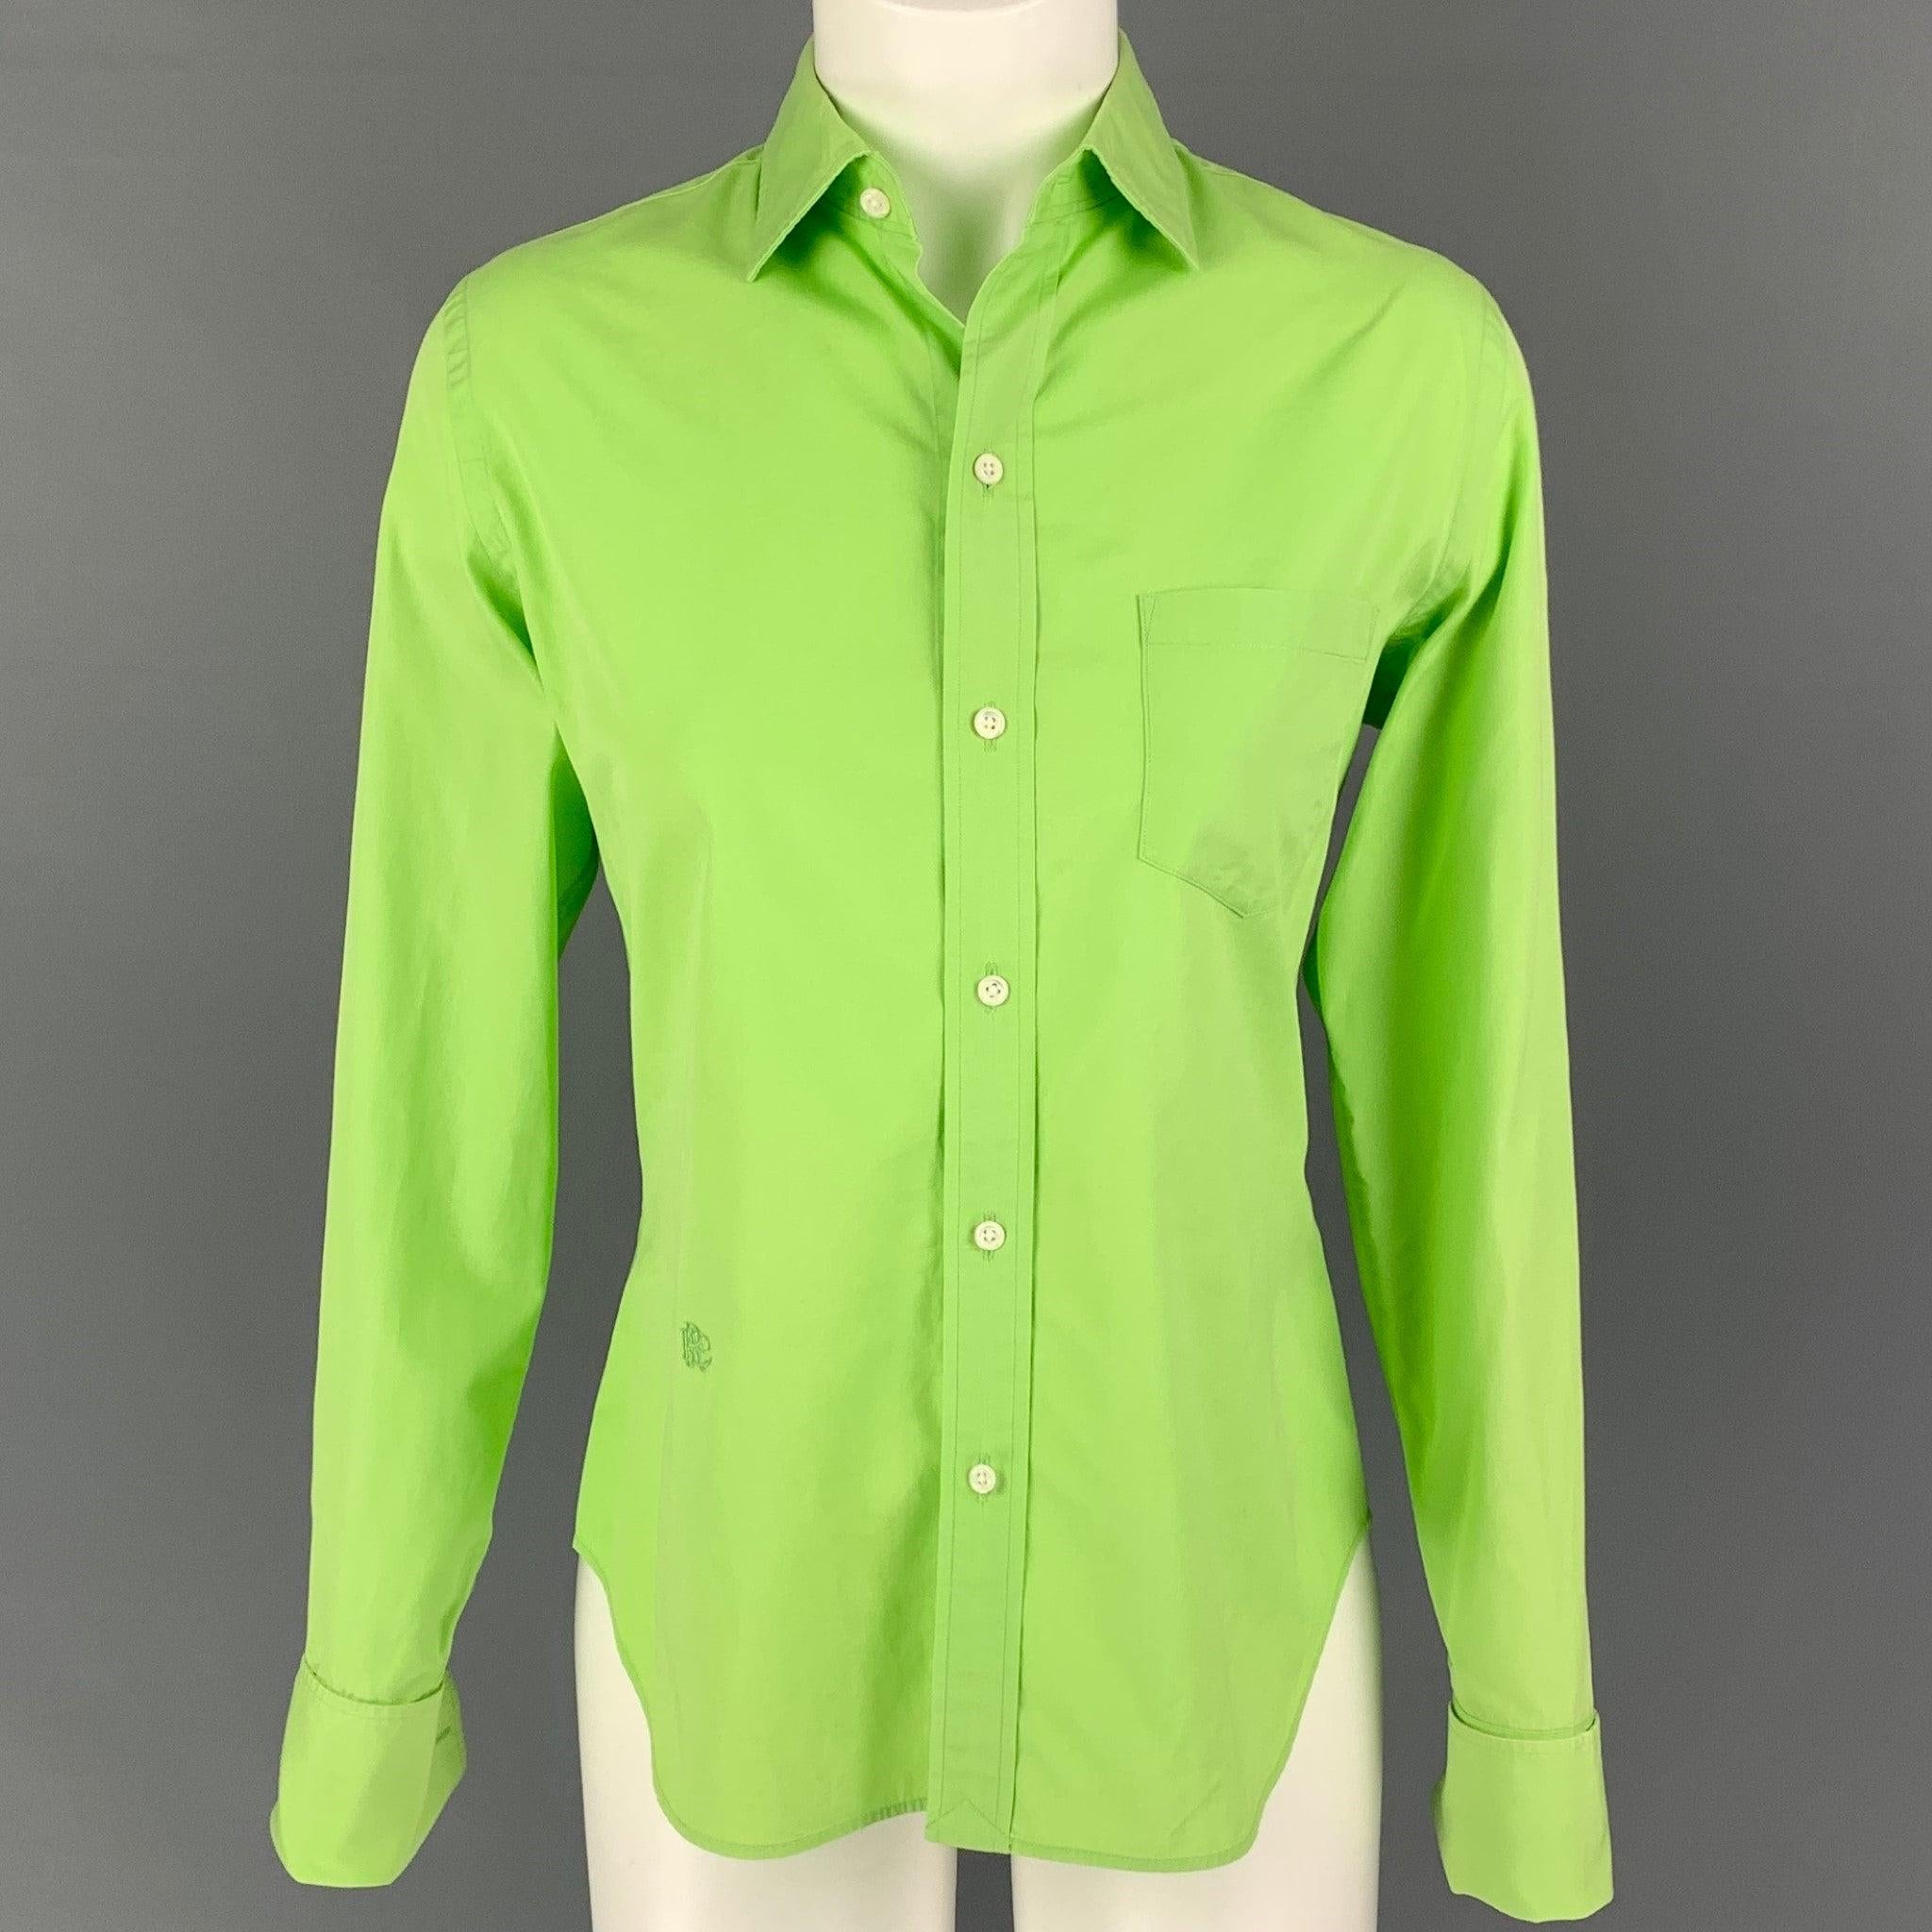 RALPH LAUREN Collection shirt comes in a chartreuse cotton featuring a spread collar, french cuffs, patch pocket, and a button up closure. Cufflinks not included. Very Good
Pre-Owned Condition. 

Marked:   8 

Measurements: 
 
Shoulder:
15 inches 